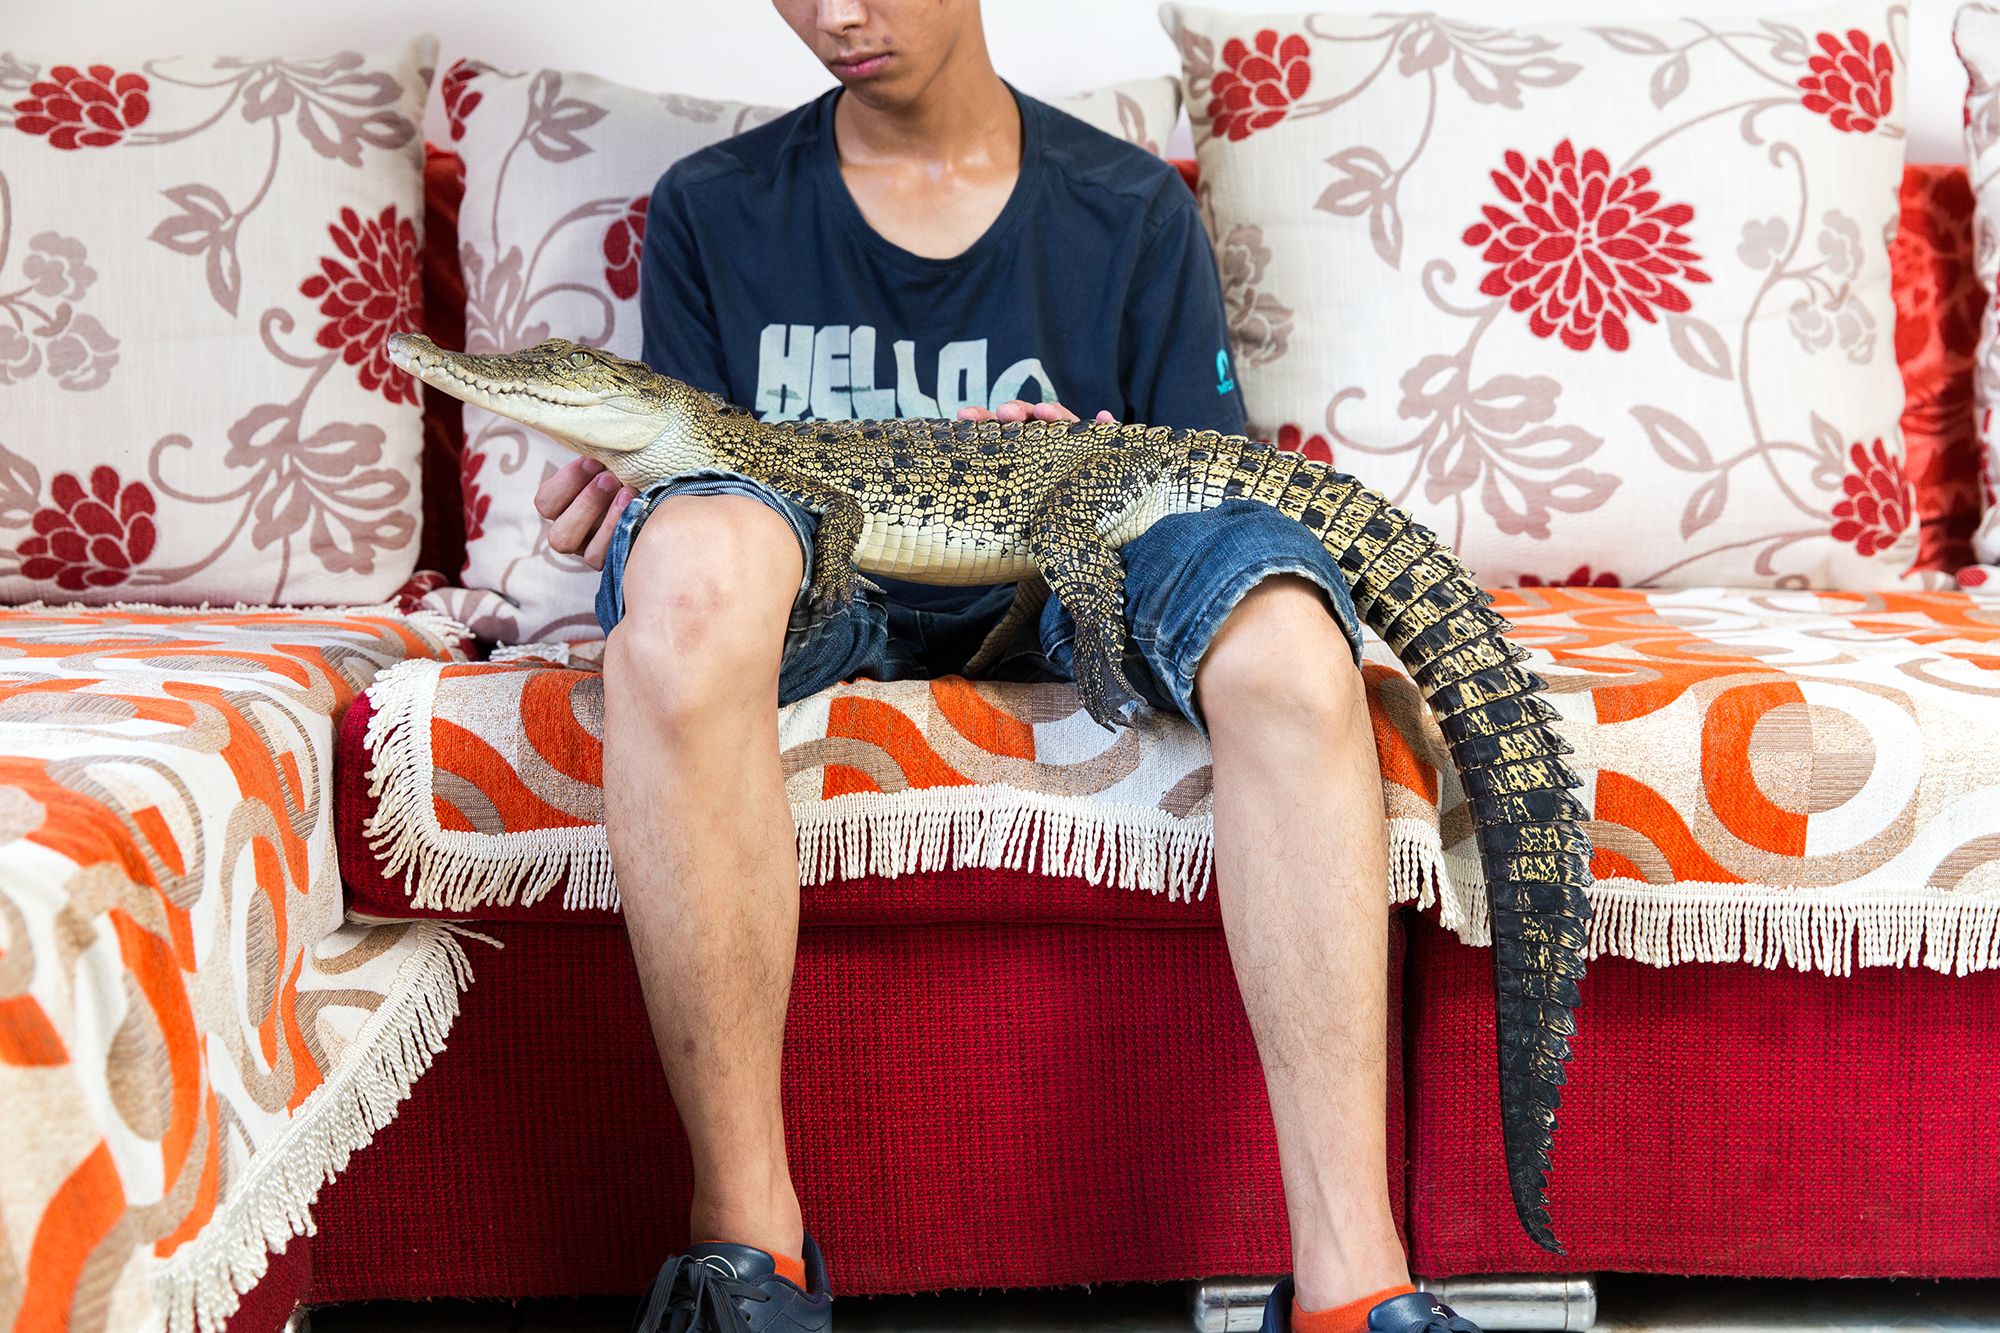 Shao Jian Feng, 26, holds a Saltwater Crocodile (Crocodylus porosus) in his home on the outskirts of Beijing. This juvenile is only two and half years old, but when fully grown can reach up to six metres, making it the largest reptile in the world. It's just one of five crocodilians he owns, along with two other large snakes. "There are twenty three crocodilian species in the world. We hope to collect all of them", he boasts. A Saltwater Crocodile can retail for up to 9000RMB (US$1500). In the wild, they can be found mainly in South East Asia and Northern Australia. Image by Sean Gallagher. China, 2017. 